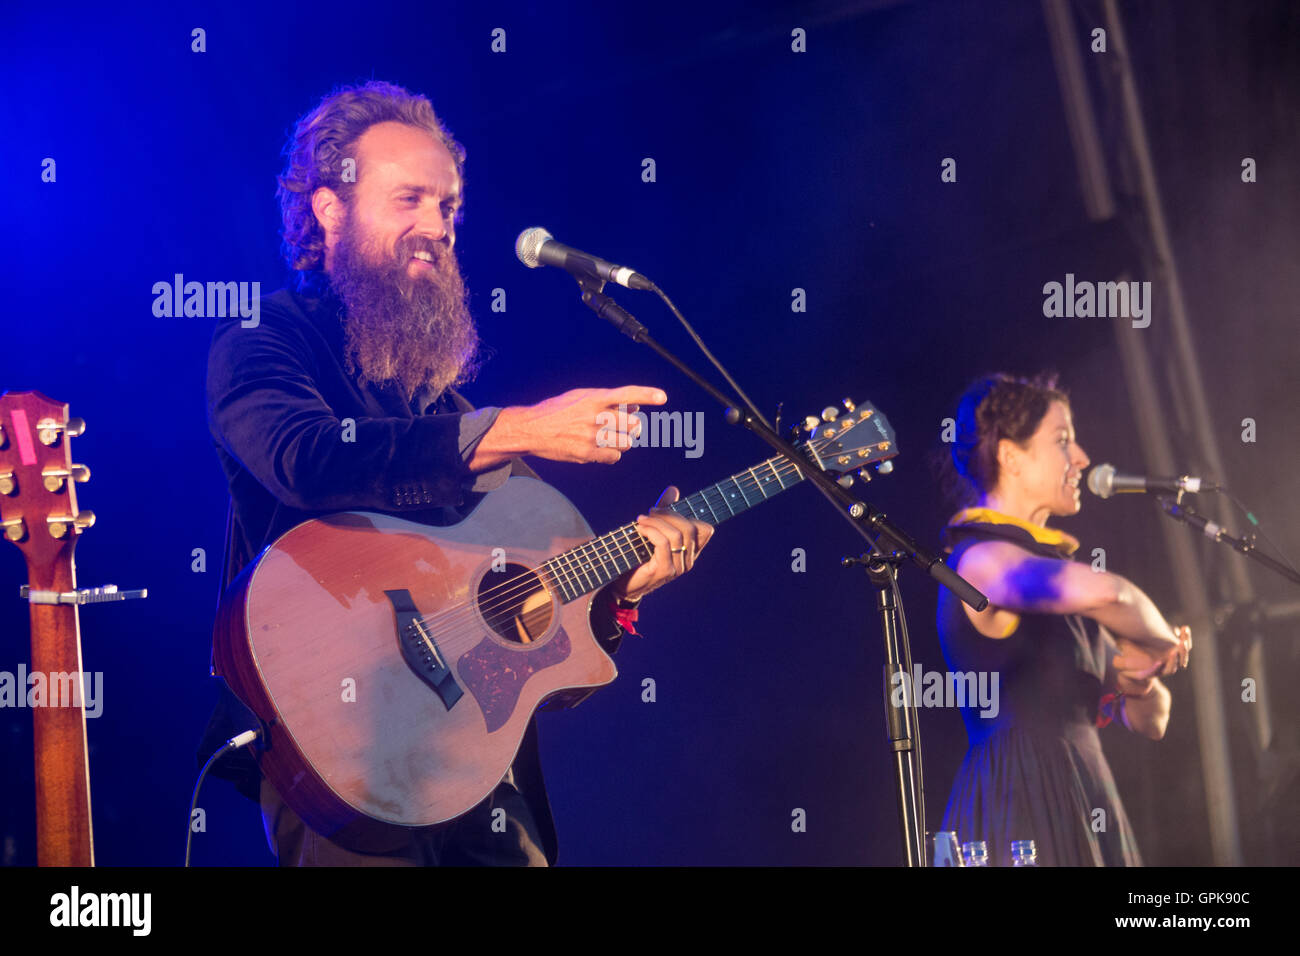 Larmer Tree Gardens, Dorset, UK. 3rd September, 2016. Sam Beam and Jesca Hoop performing on the Garden Stage on day 3 of the 2016 End of the Road Festival in Larmer Tree Gardens in Dorset. Picture date: Saturday September 3, 2016. Photo credit: Roger Garfield/Alamy Live News Stock Photo